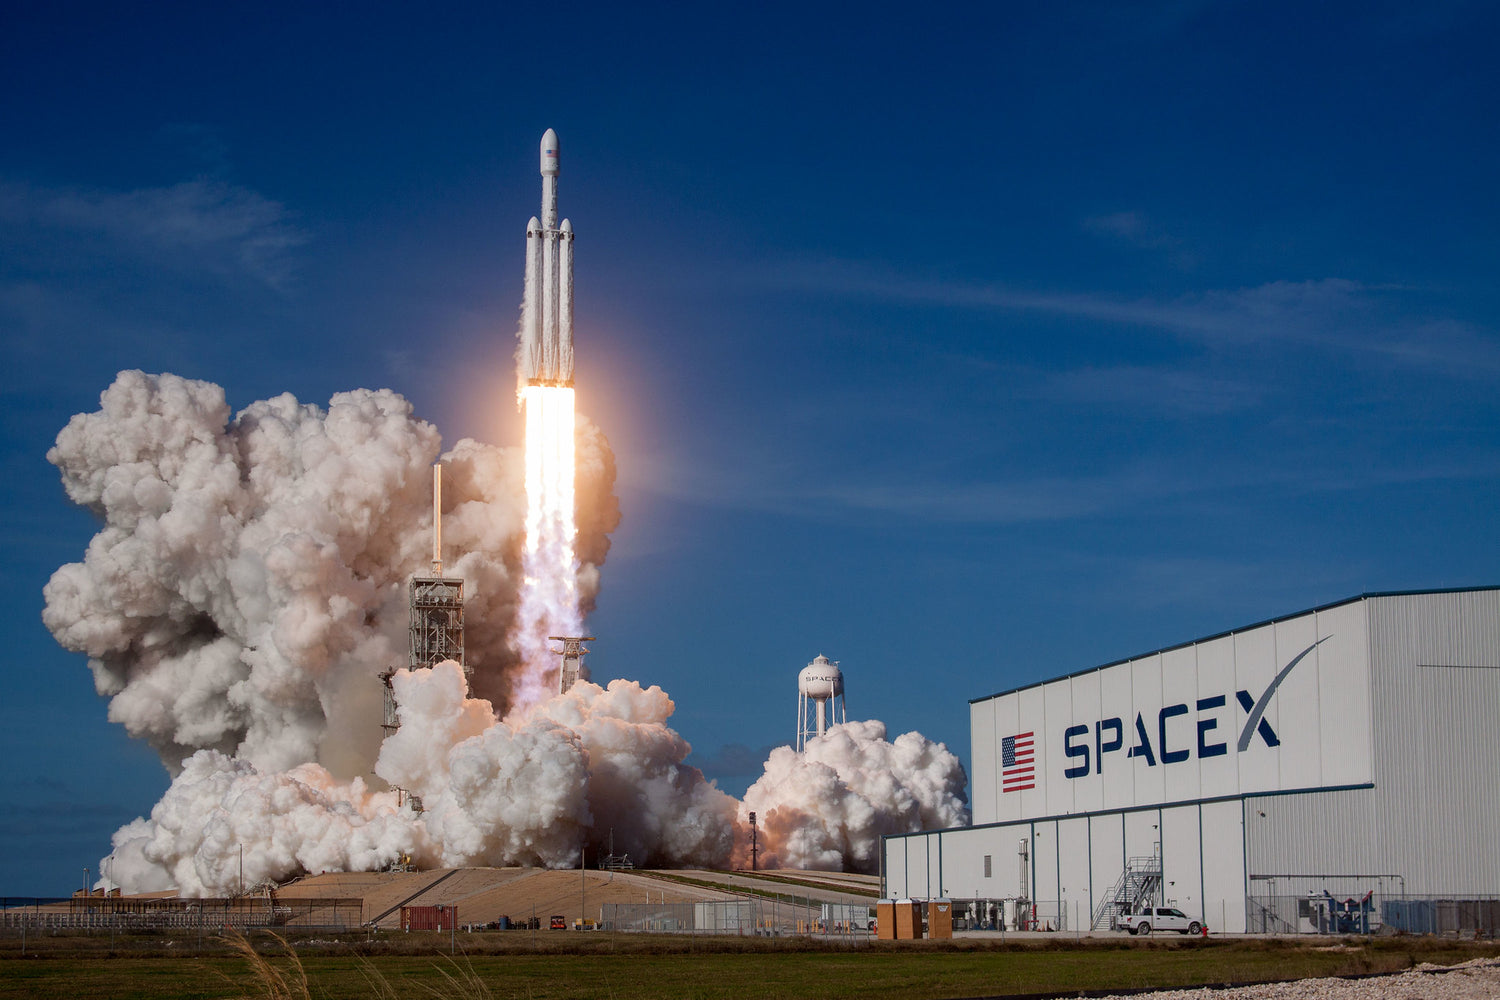 U.S. Space Force Awards An Additional $19 Million To SpaceX For A National Security Mission